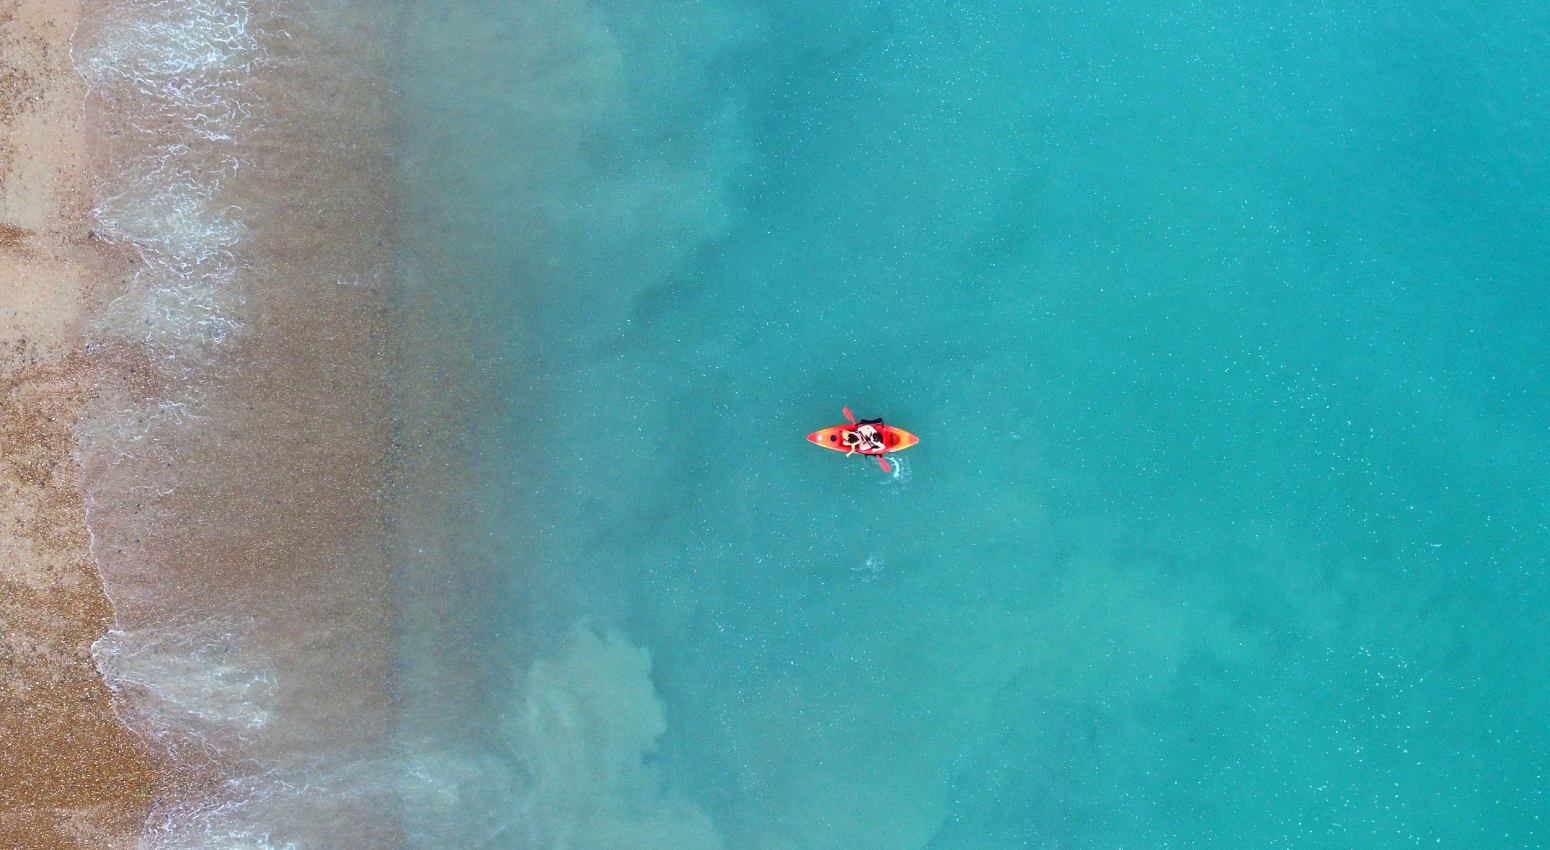 Guests Kayaking in turquoise waters during a Variety Cruises Expedition